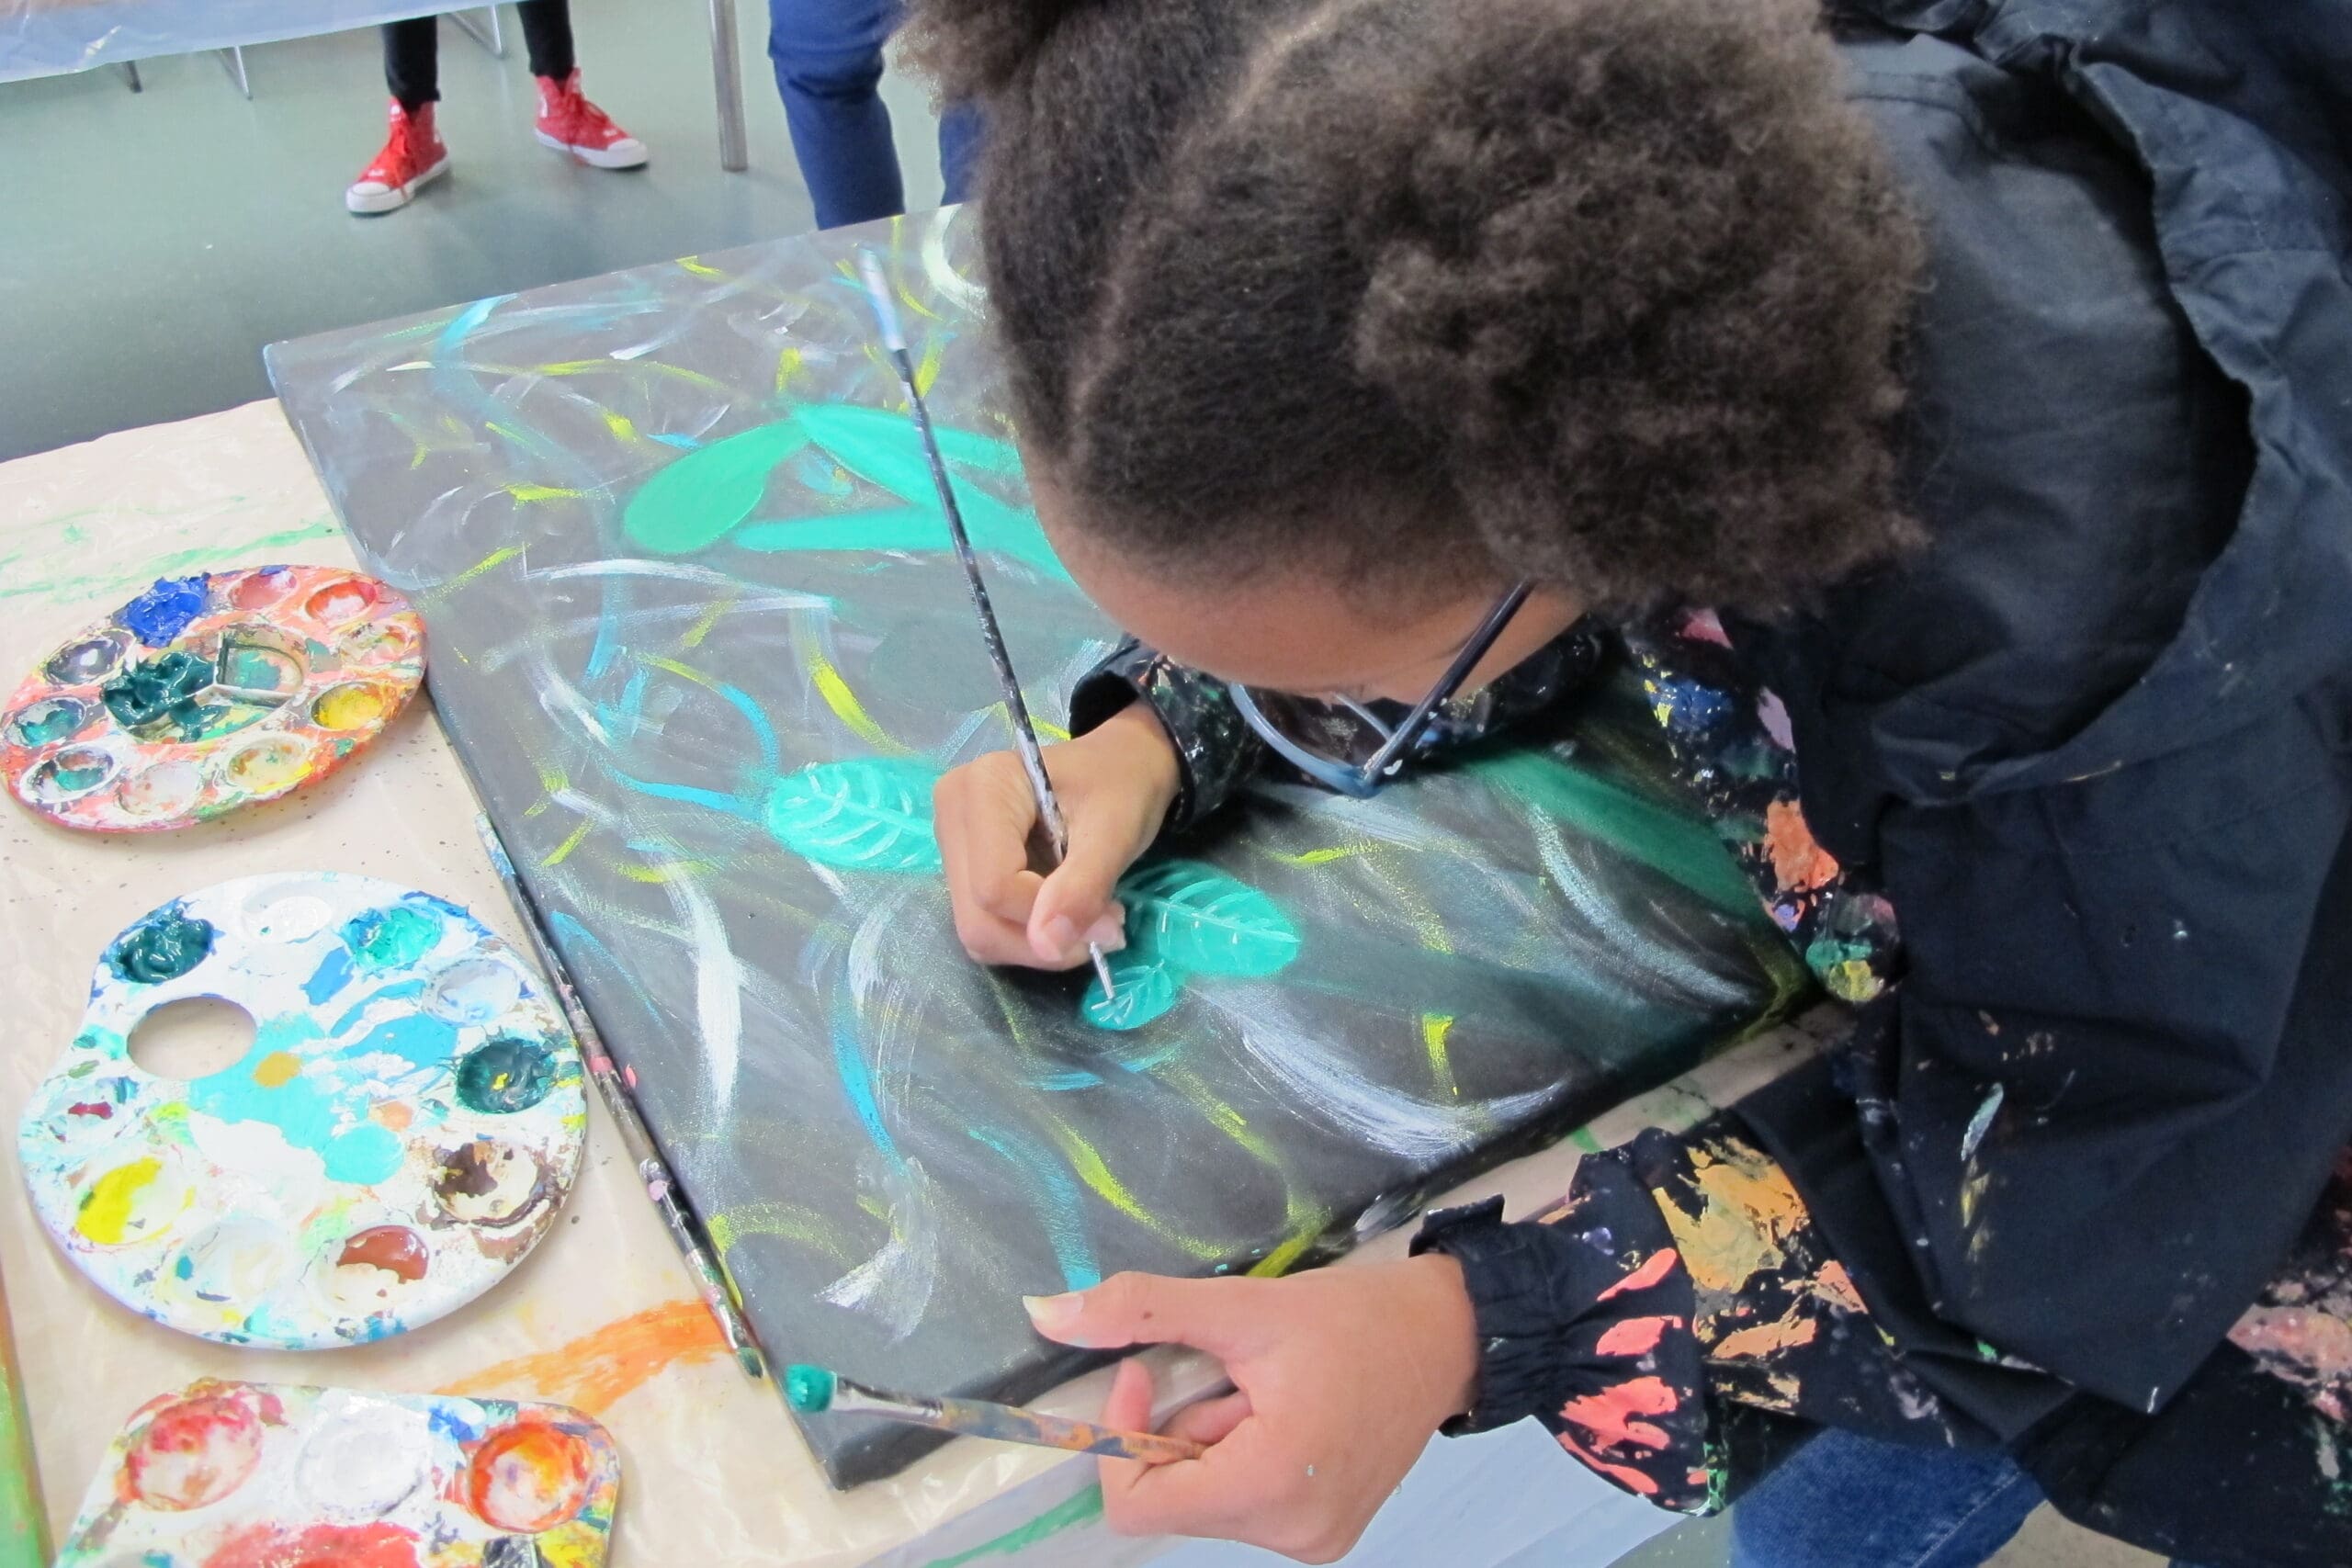 student painting a black, turquoise and white painting